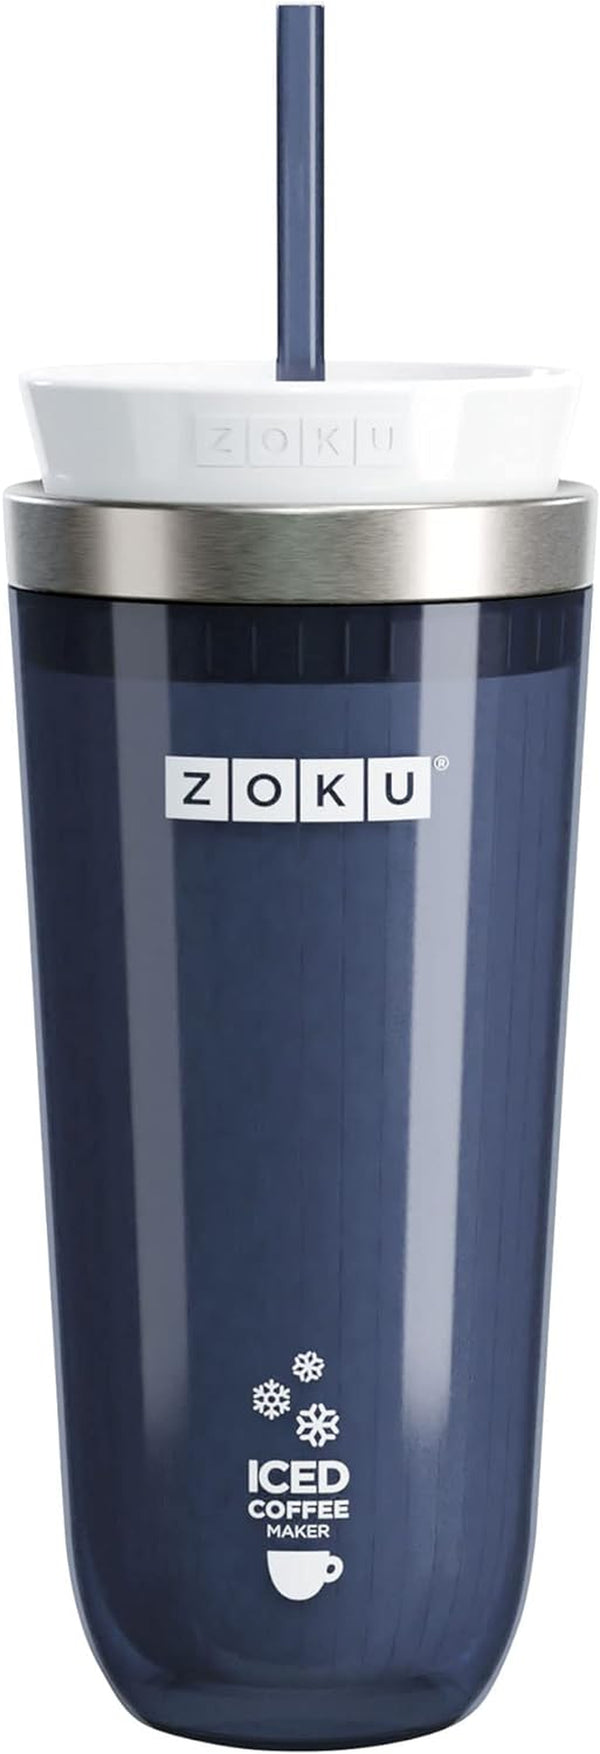 Zoku Instant Iced Coffee Maker, Reusable Beverage Chiller Cools Hot Beverages in Minutes Without Dilution, Portable 11-ounce Tumbler With Spill-resistant Lid and Straw, Grey